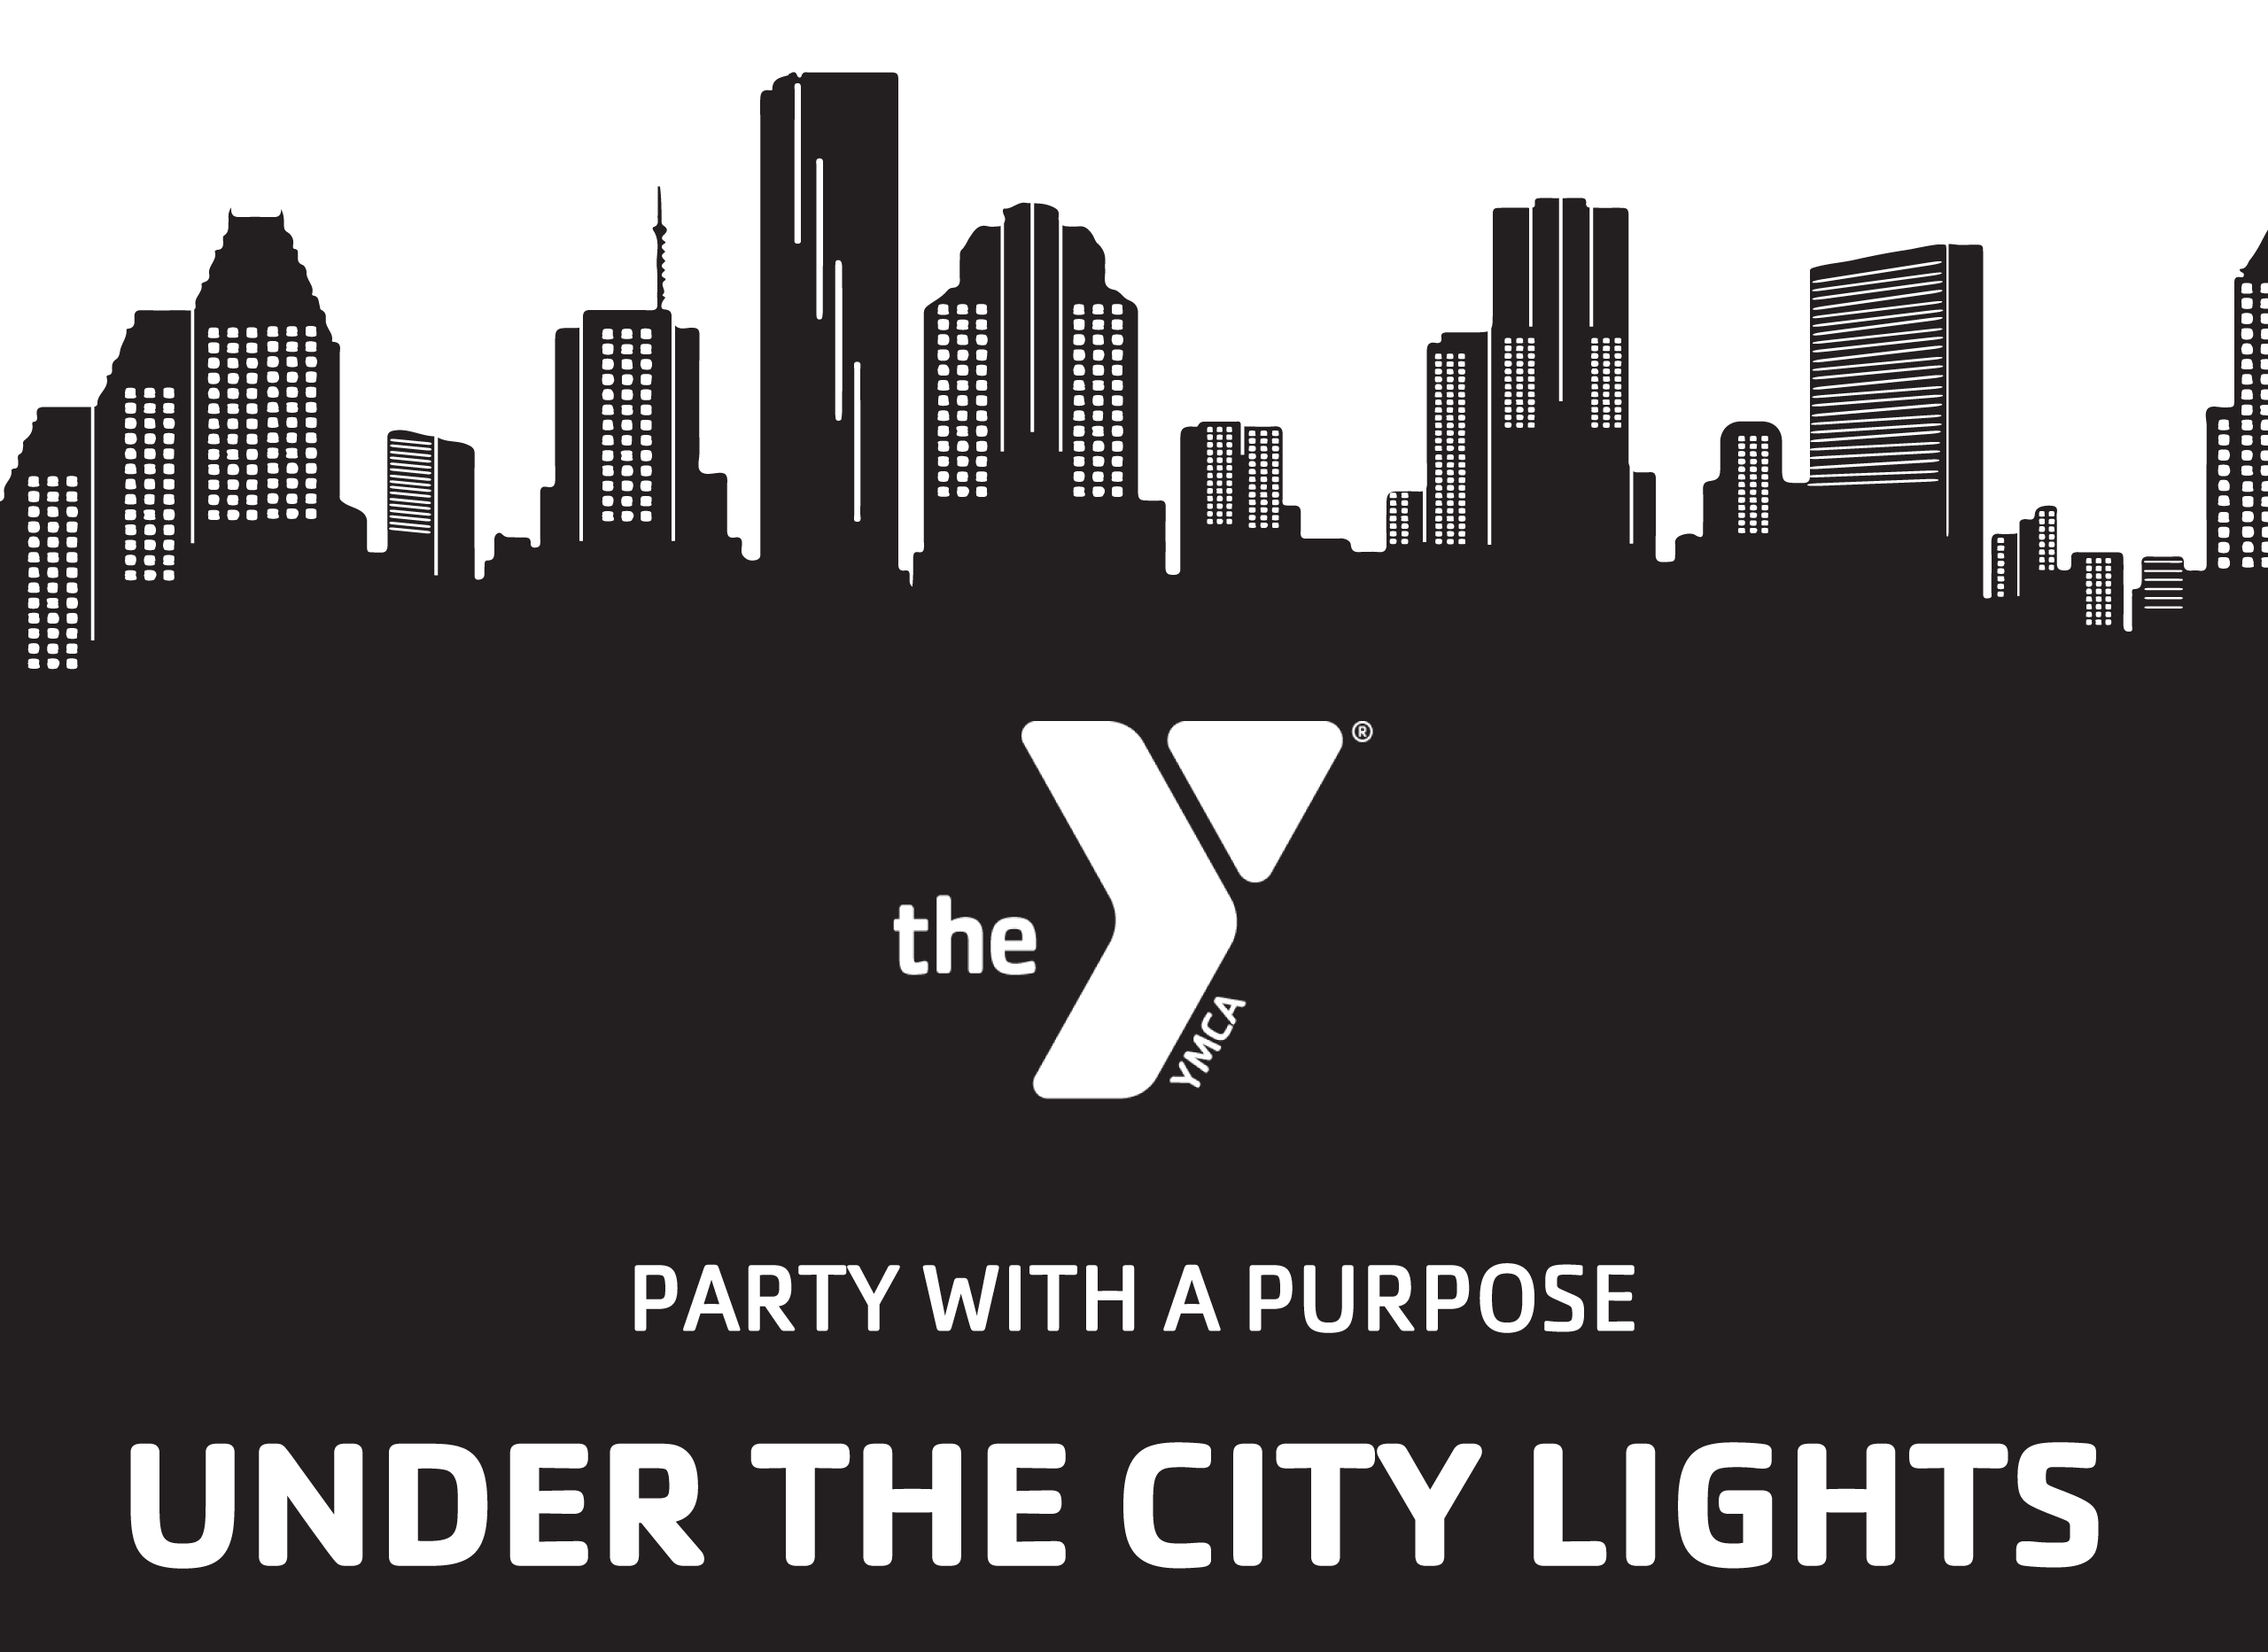 A black and white graphic of a city skyline with the YMCA logo and the text “Party with a purpose under the city lights”.